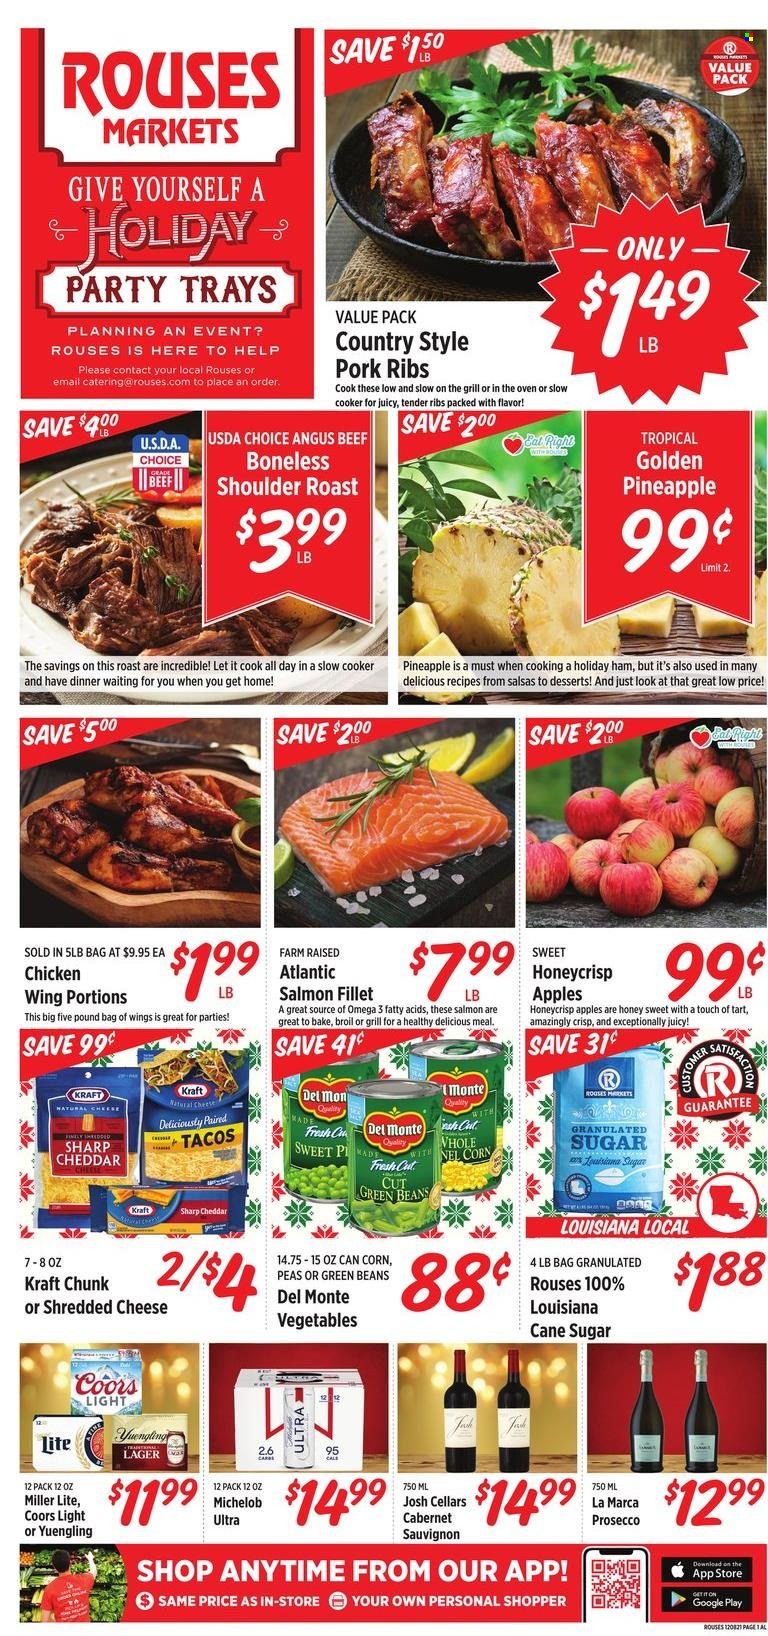 thumbnail - Rouses Markets Flyer - 12/08/2021 - 12/15/2021 - Sales products - tart, tacos, beans, corn, green beans, peas, pineapple, salmon, salmon fillet, Kraft®, ham, shredded cheese, cheddar, cane sugar, granulated sugar, sugar, Cabernet Sauvignon, red wine, prosecco, wine, beer, Lager, beef meat, pork meat, pork ribs, Omega-3, Miller Lite, Coors, Yuengling, Michelob. Page 1.